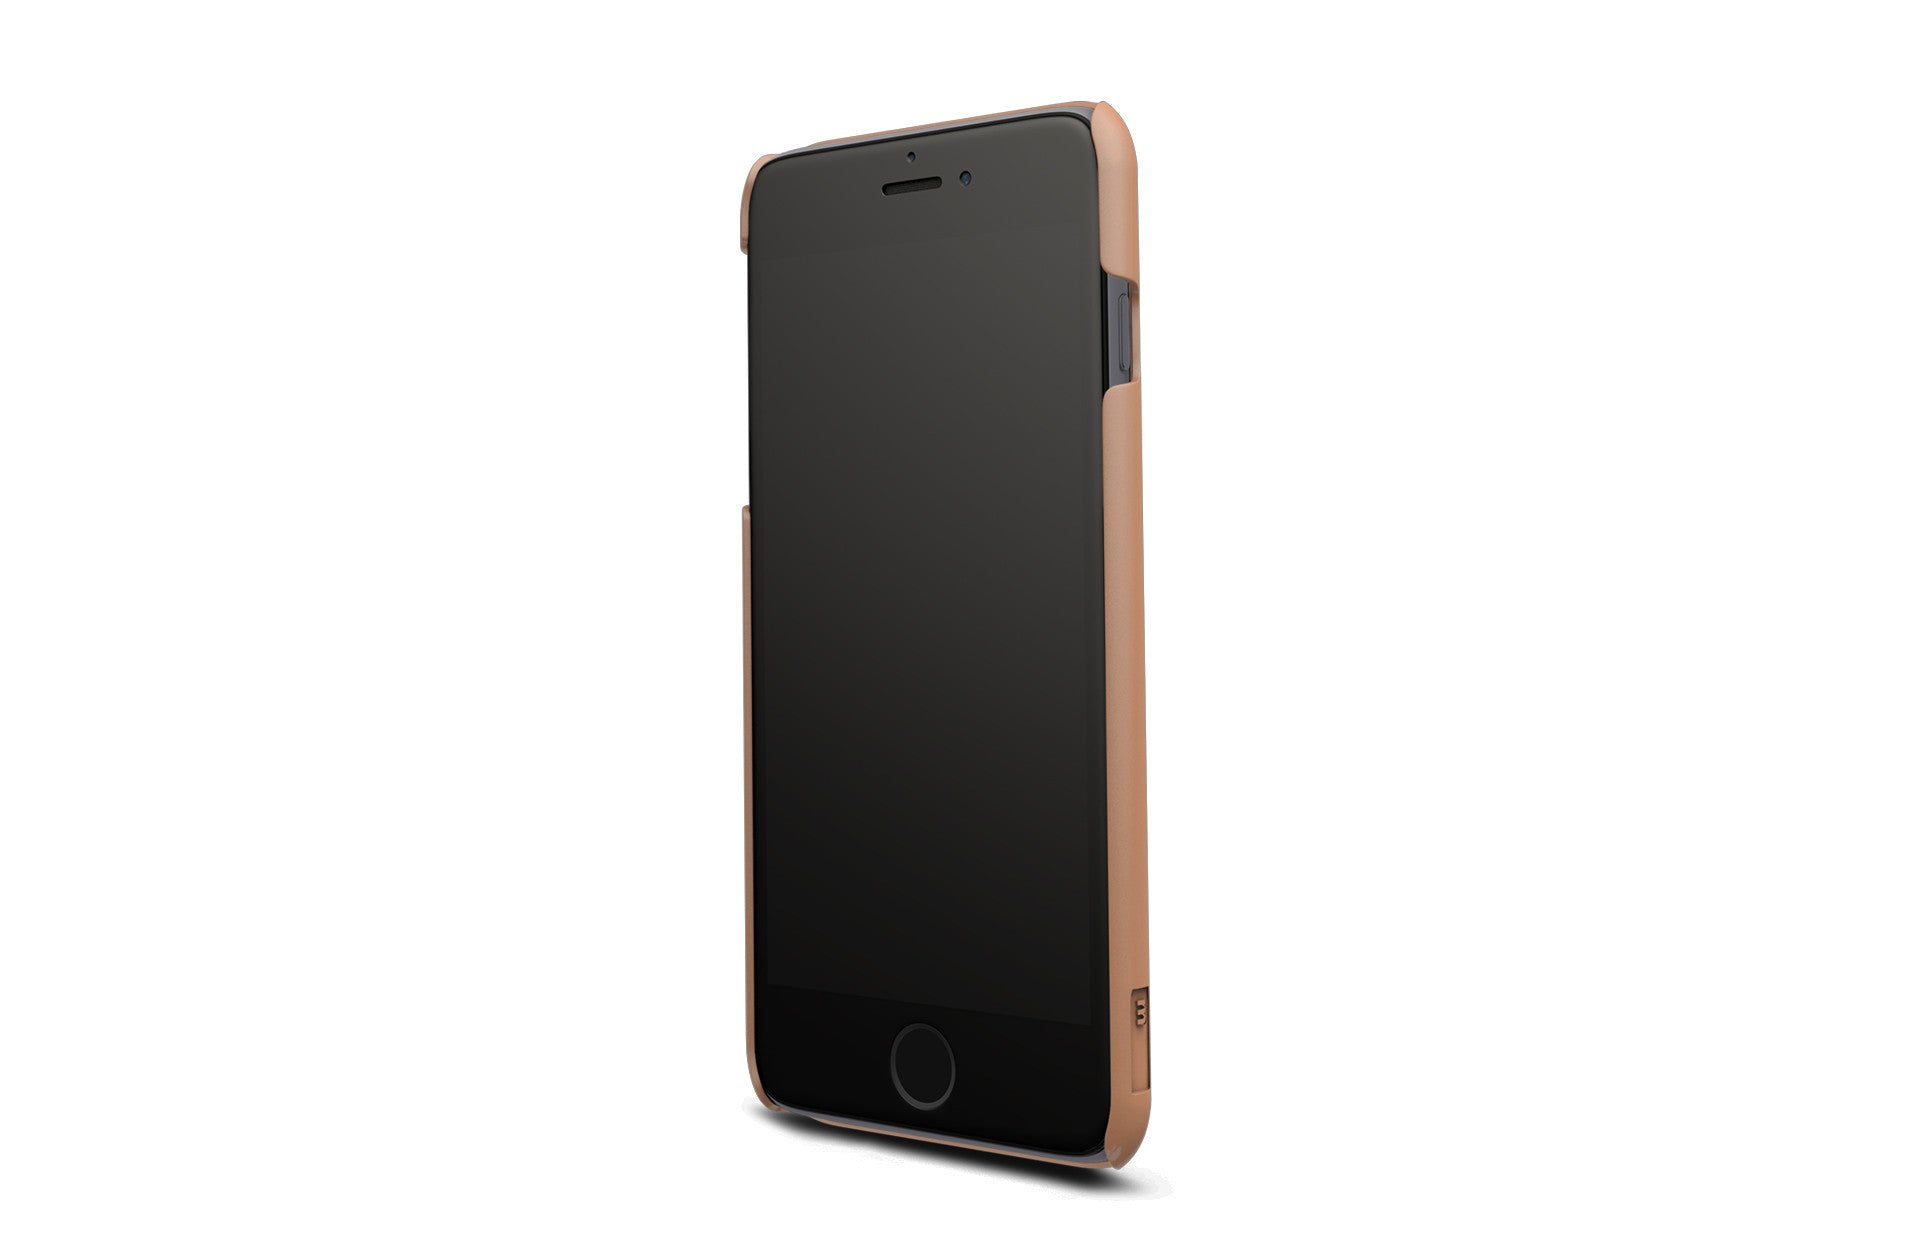 ThreeDCase 3D Molded from Premium Polycarbonate Composite for iPhone 6/6S